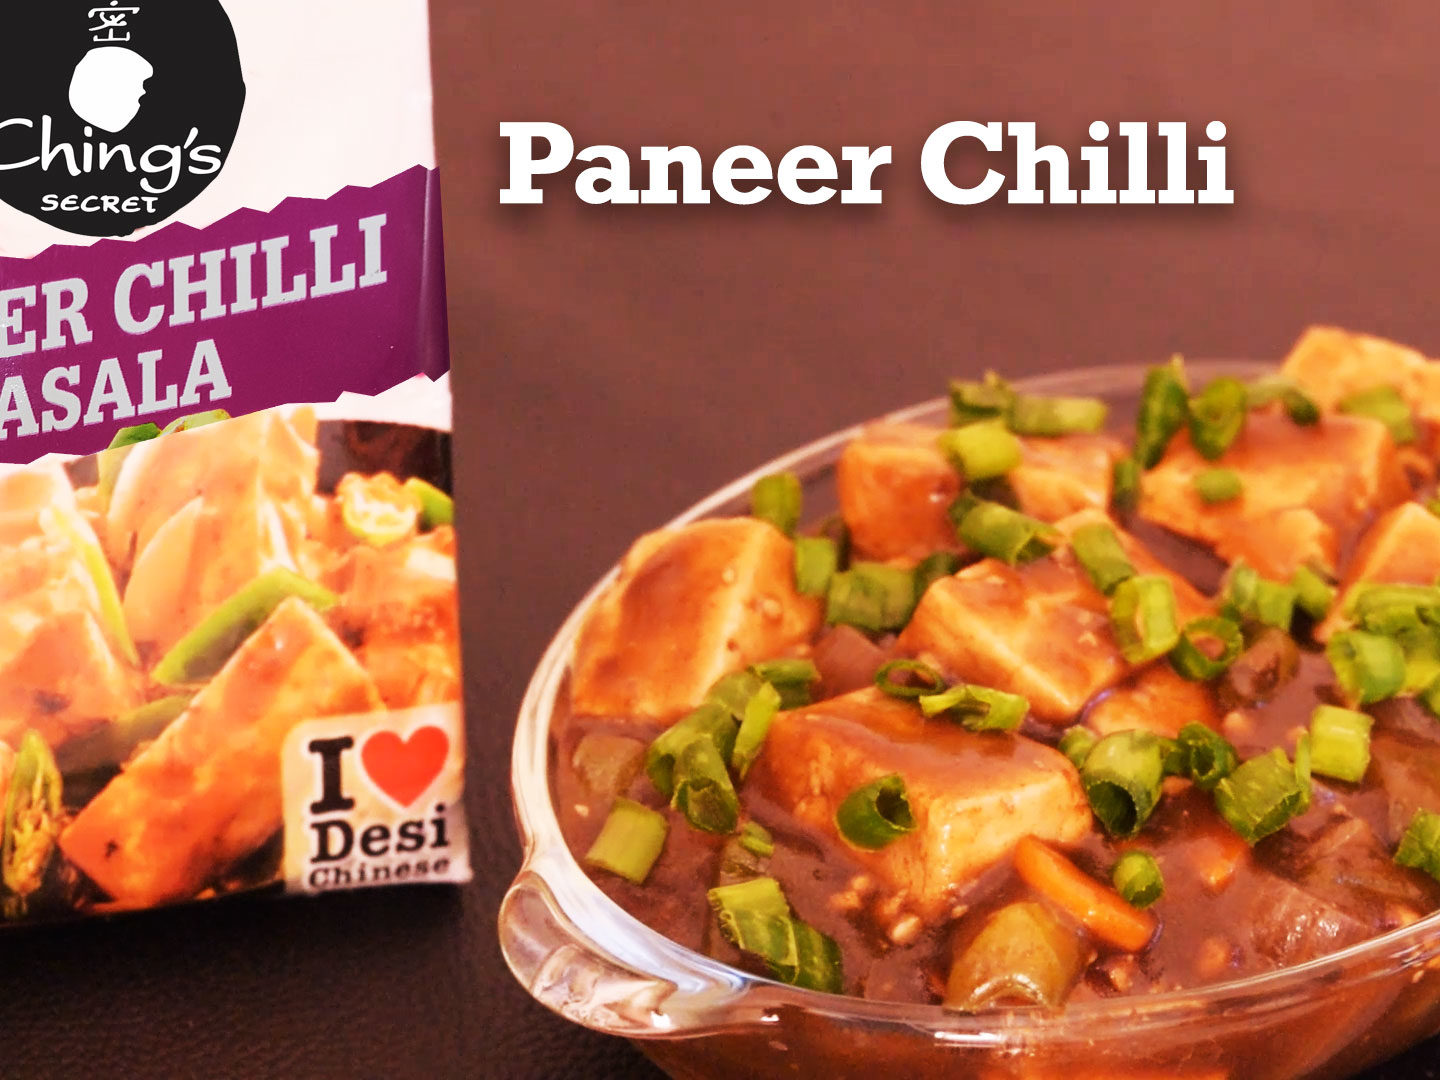 Paneer Chilli recipe step by step